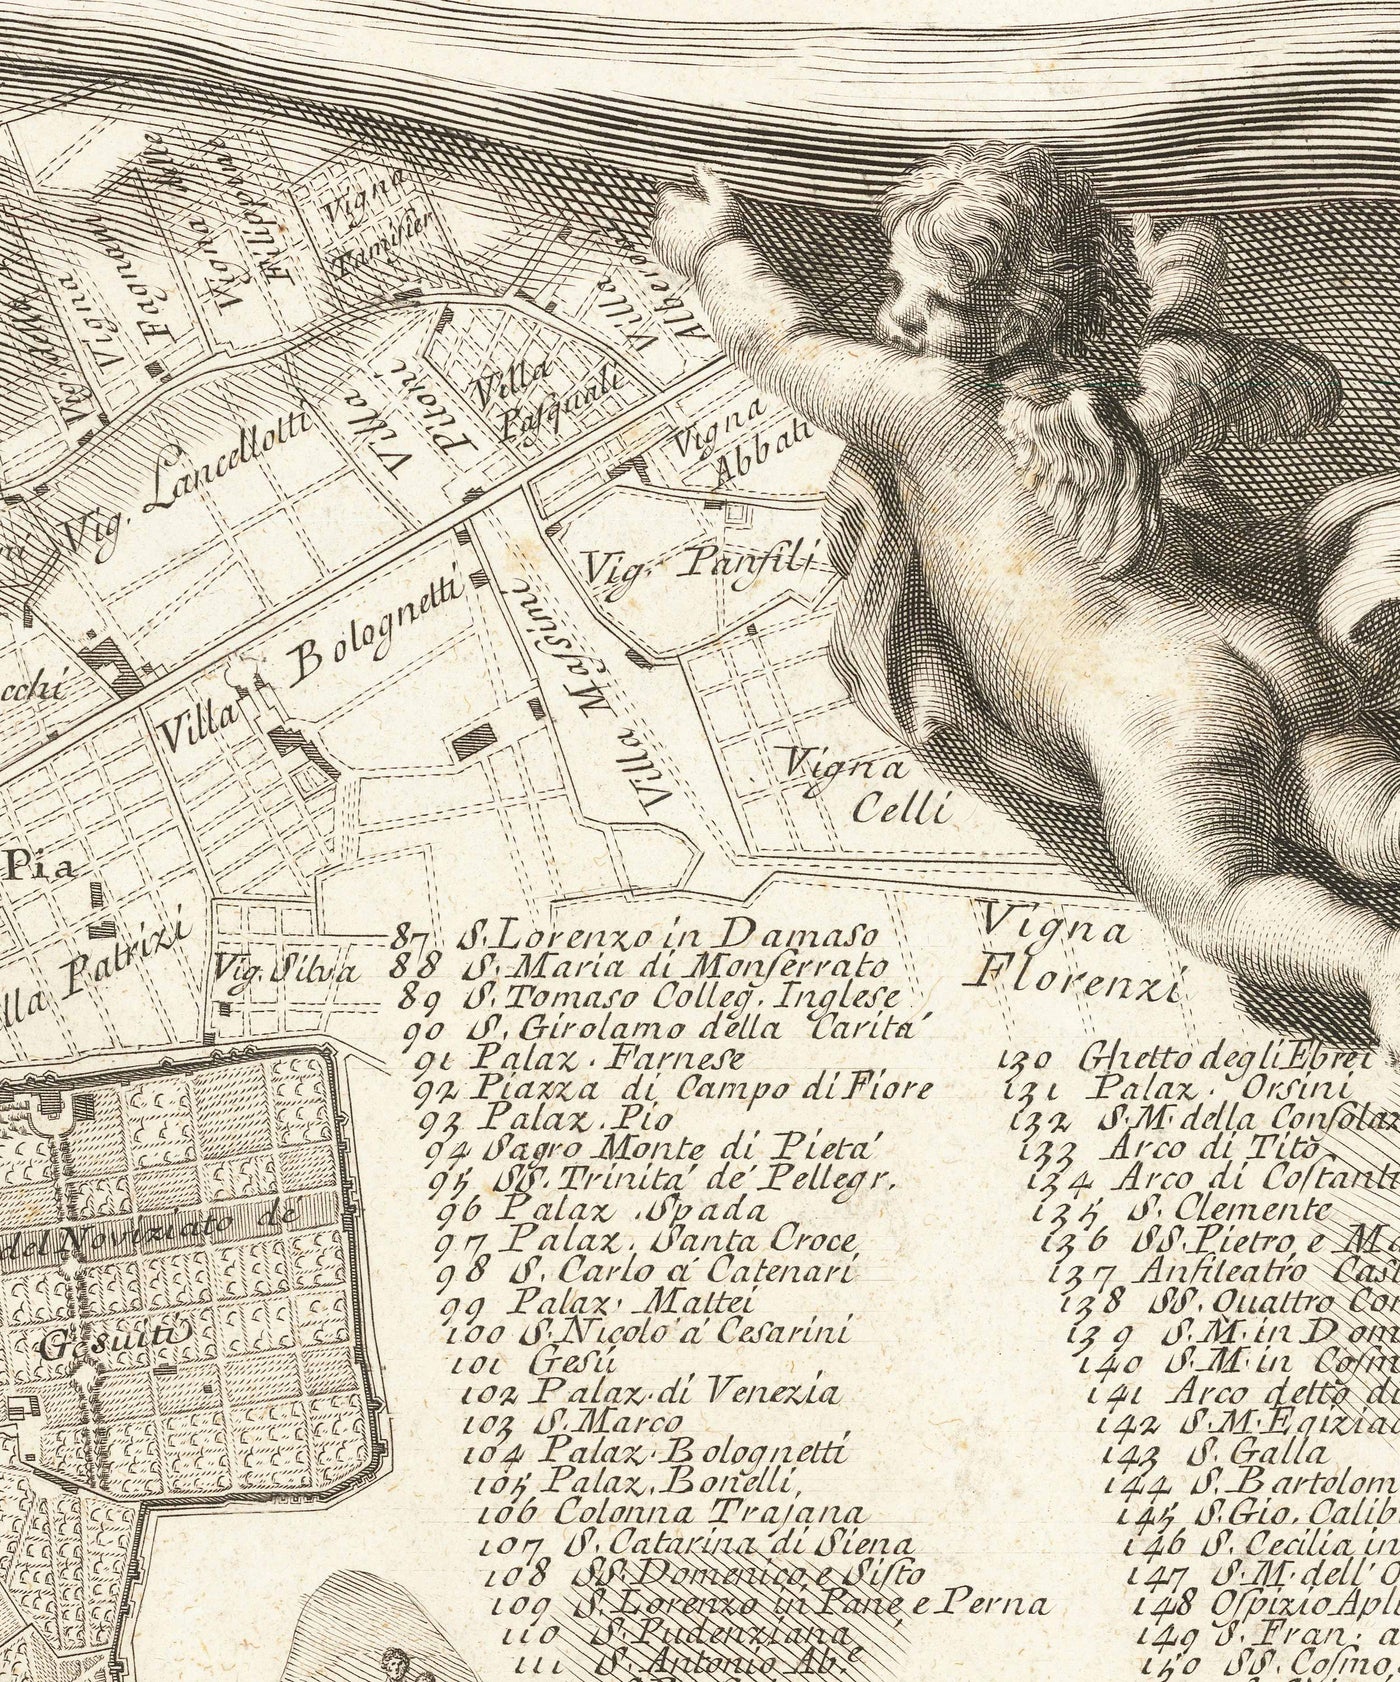 Rare Old Map of Rome, Italy by Nolli & Piranesi, 1748 - Vatican, St Peter's Basilica, Trevi Fountain, Colosseum